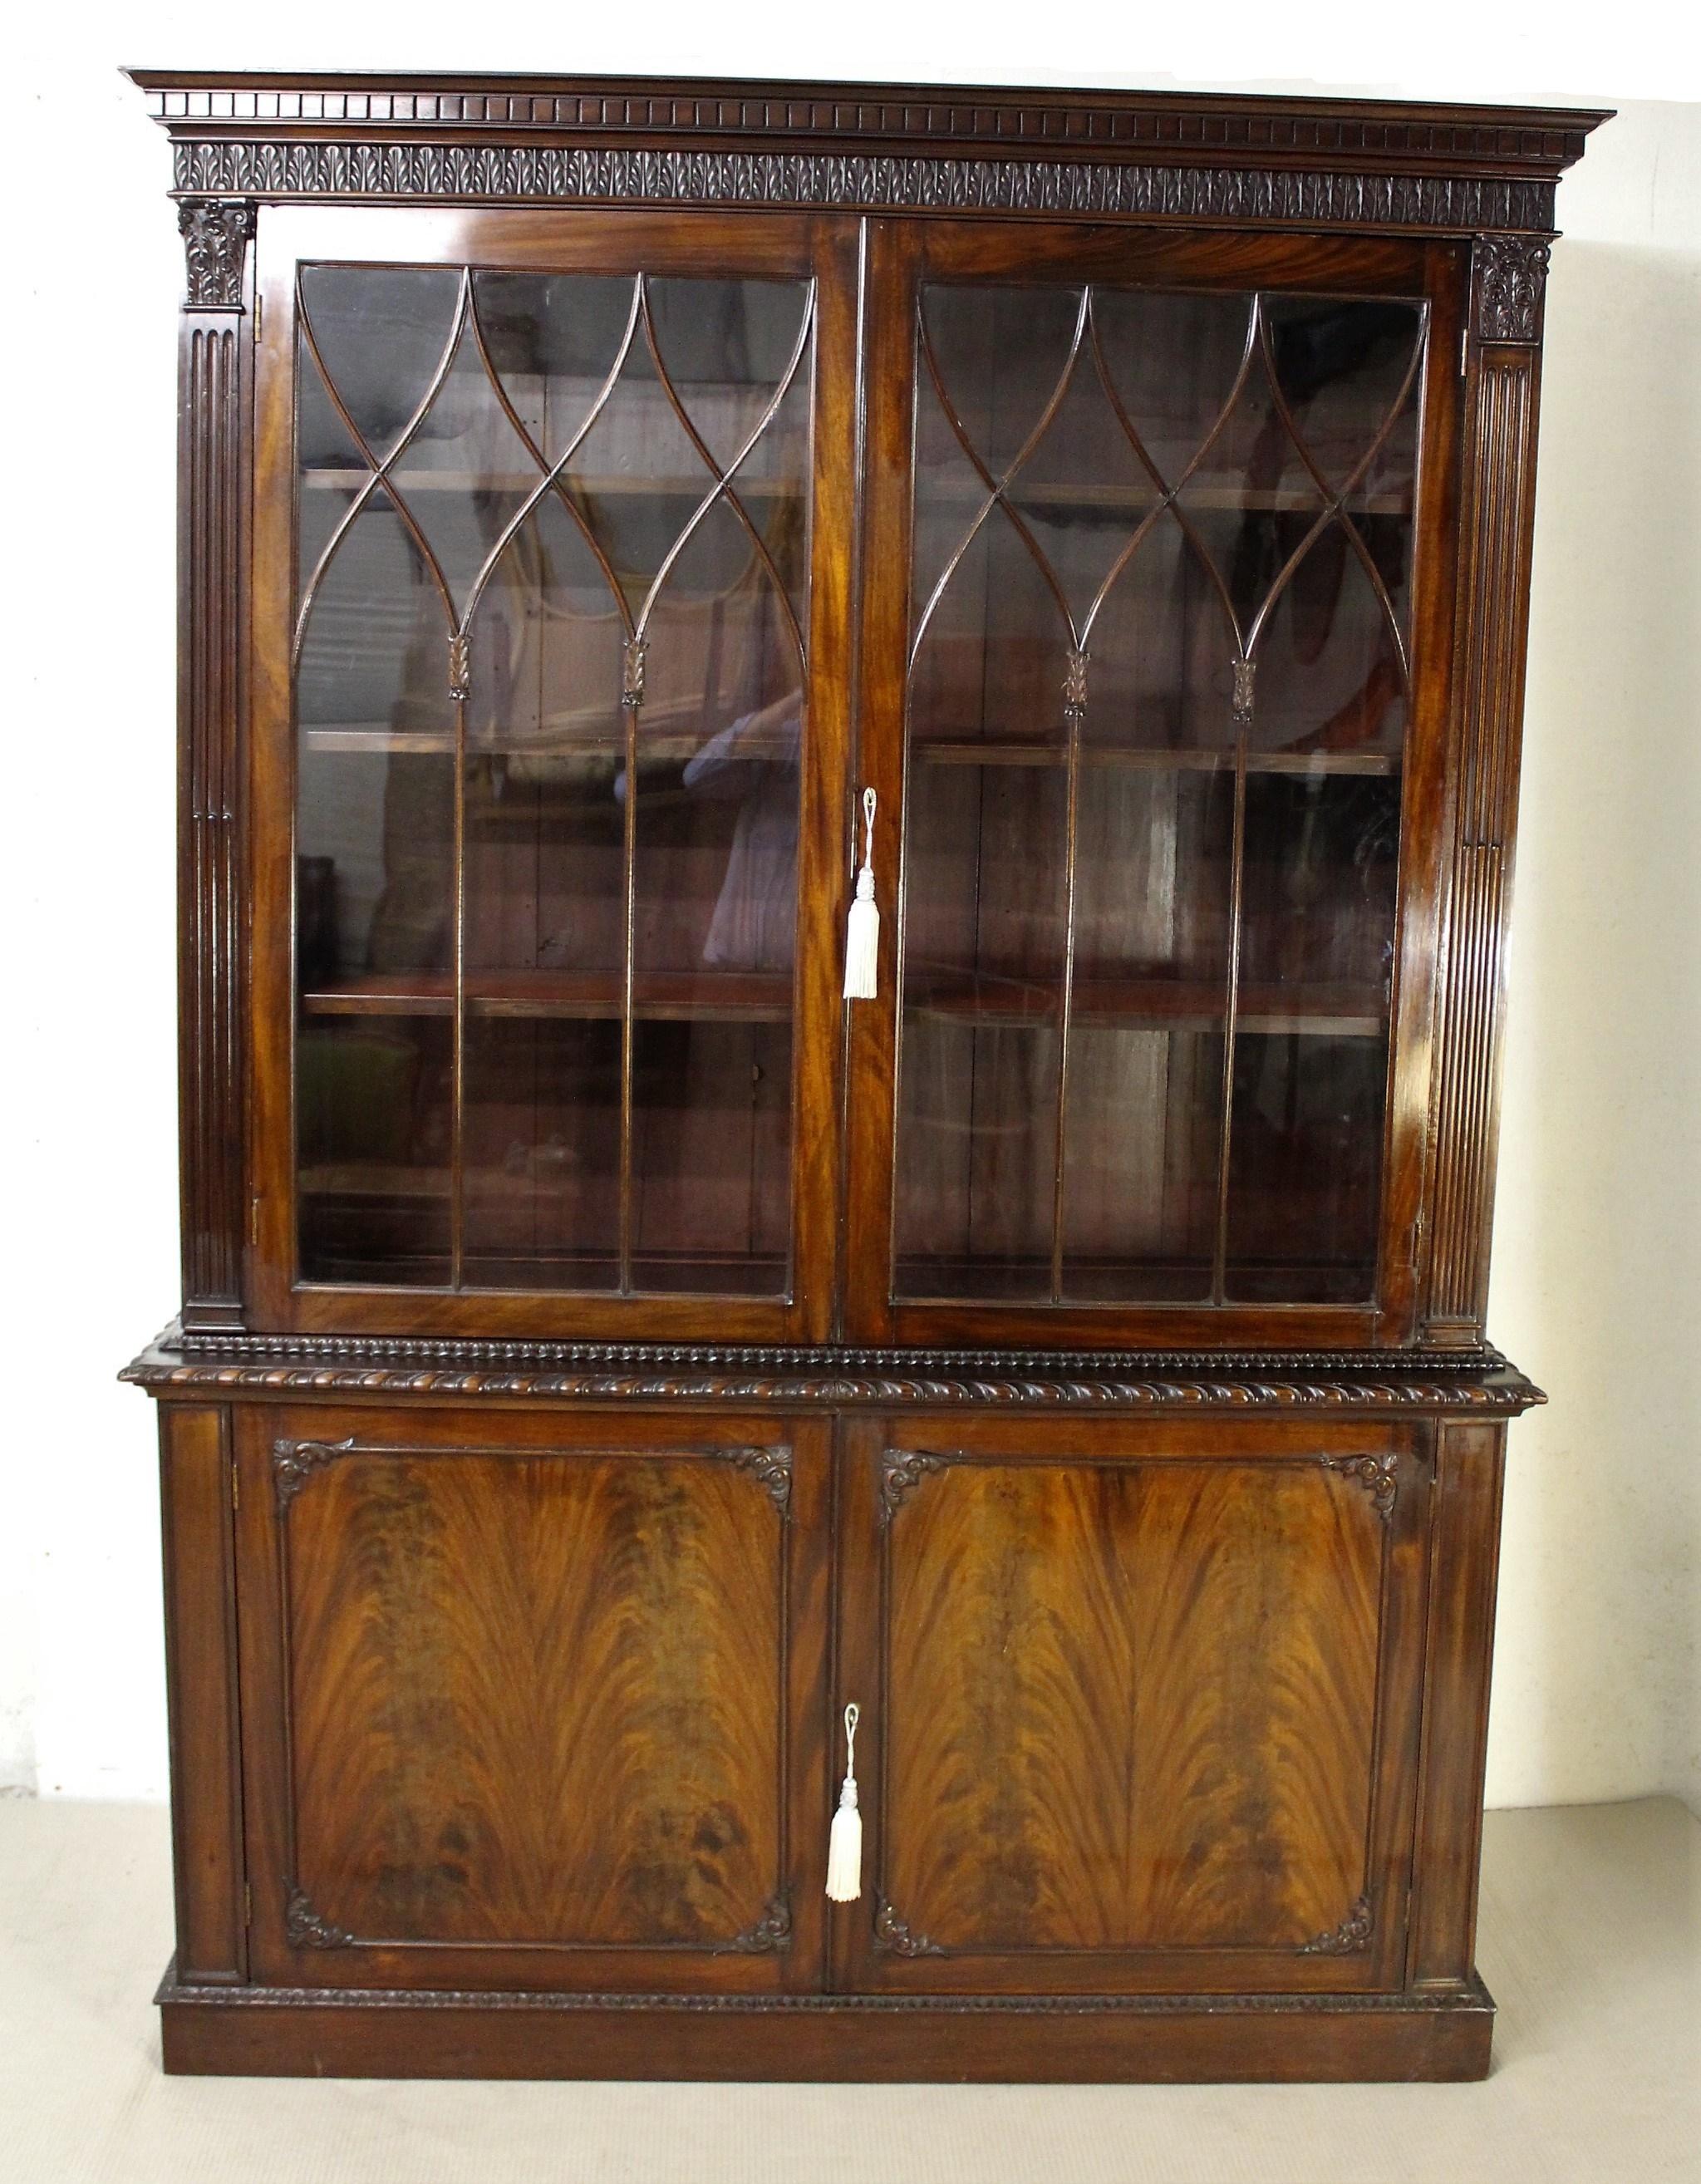 A splendid mahogany Chippendale style bookcase from the Edwardian period. Of fine construction and generous proportions. The top section with a pair of glazed doors flanked by Corinthian pilasters topped with capitals. The doors open to access the